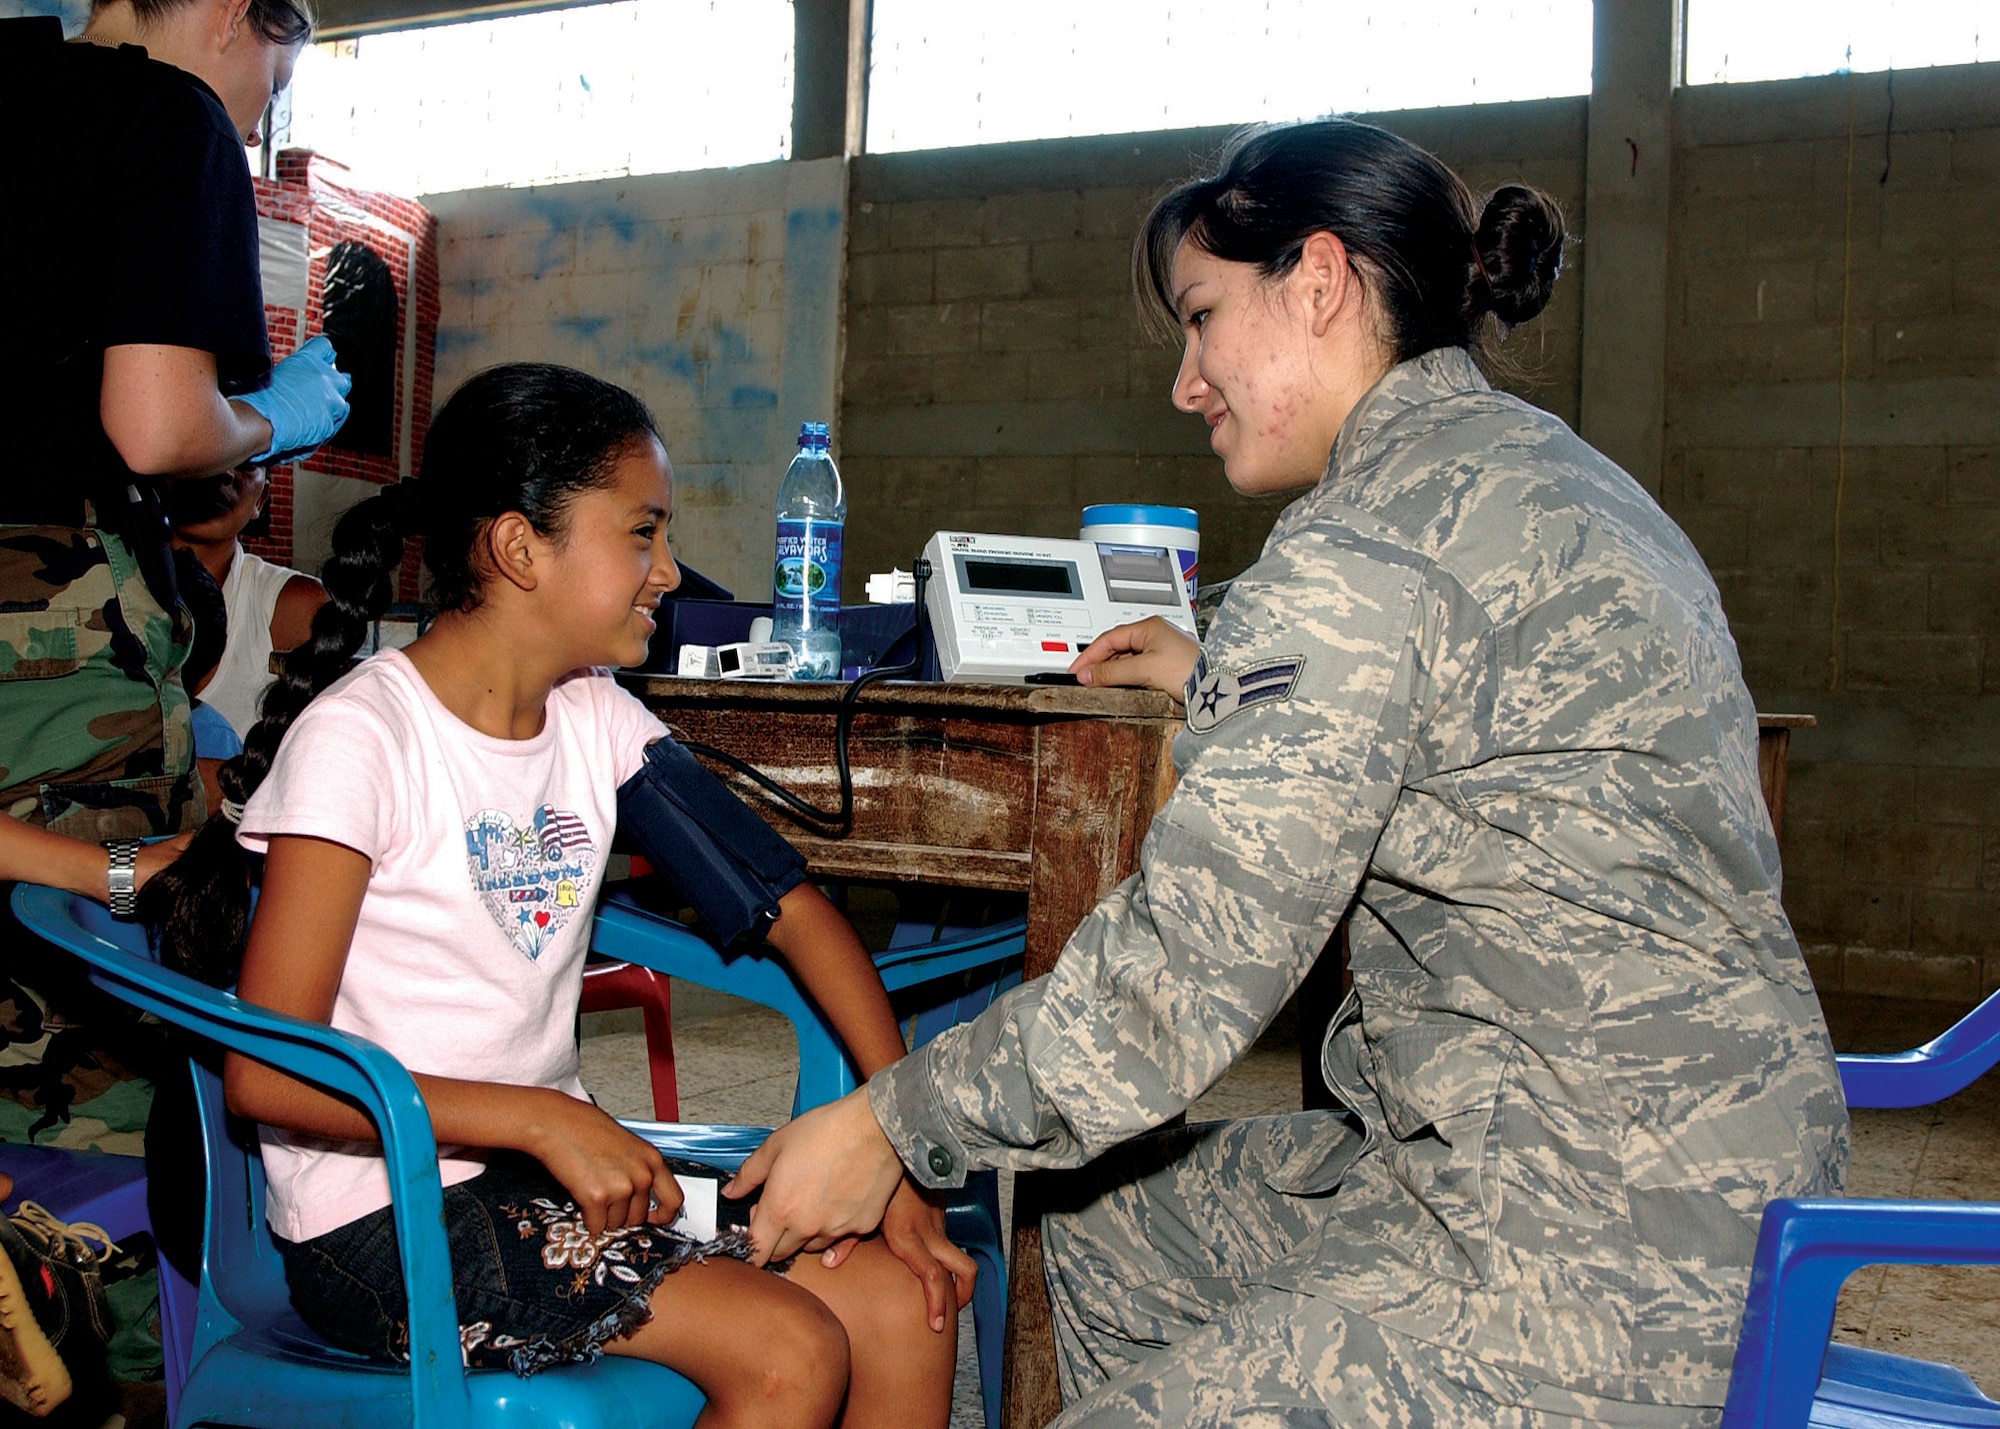 Airman 1st Class Jasmine Diaz, 163d Medical Group medical technician, checks a Guatemalan girl's blood pressure at a school in Santa Rosa. More than 5,700 Guatemalan citizens from three of Santa Rosa's poorest communities flocked to see members of the 163d medical group who traveled to Guatemala Aug. 16-30 to provide medical care. (U.S. Air Force photo by Capt Al Bosco, 163RW/PA)